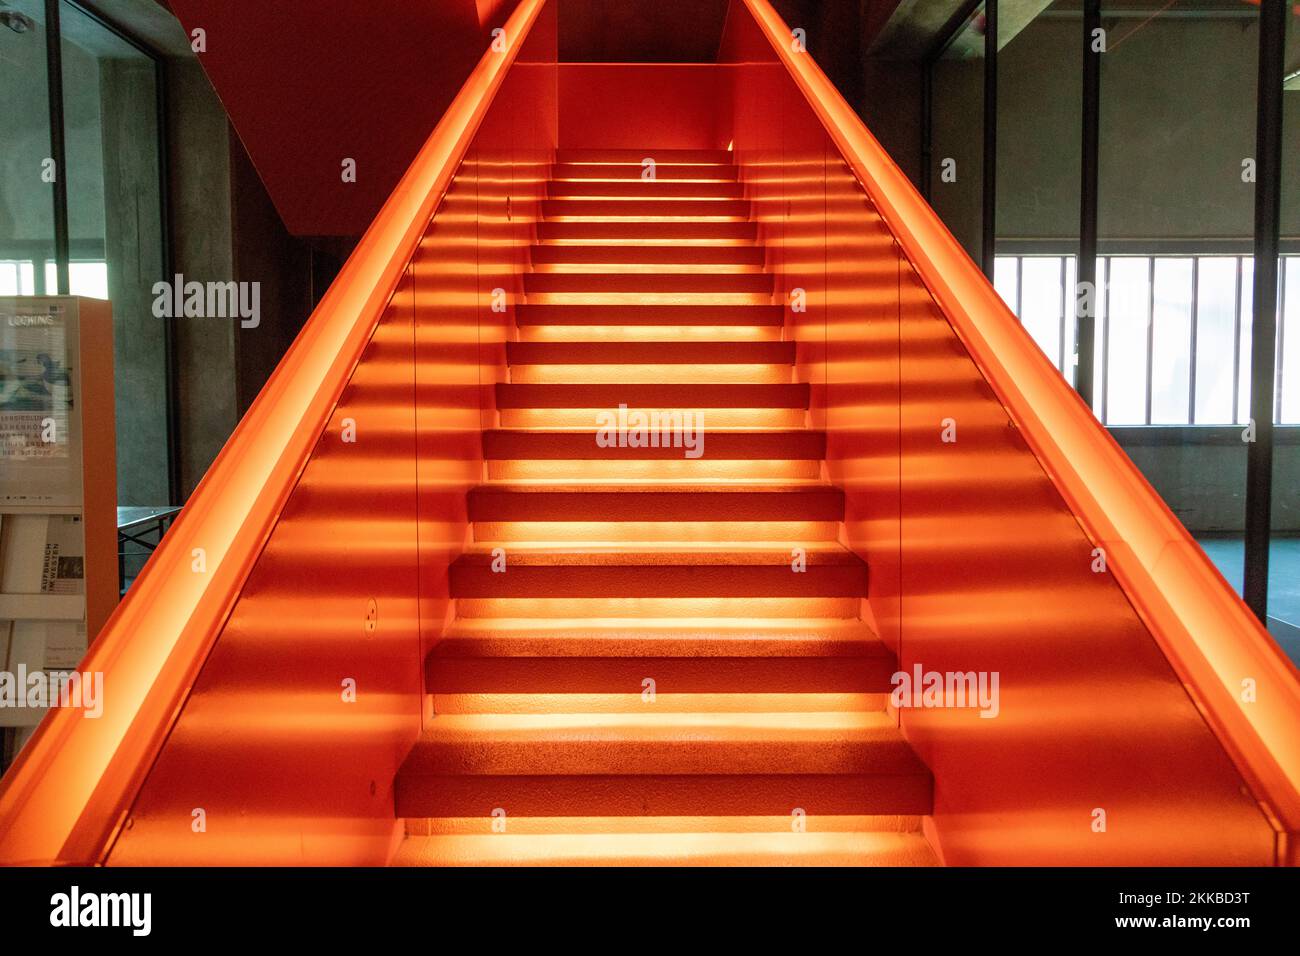 Essen, Germany - July 23, 2019:  Interior view of beautiful orange illuminated remarkable staircase is located at the entrance of Ruhr museum at Zeche Stock Photo